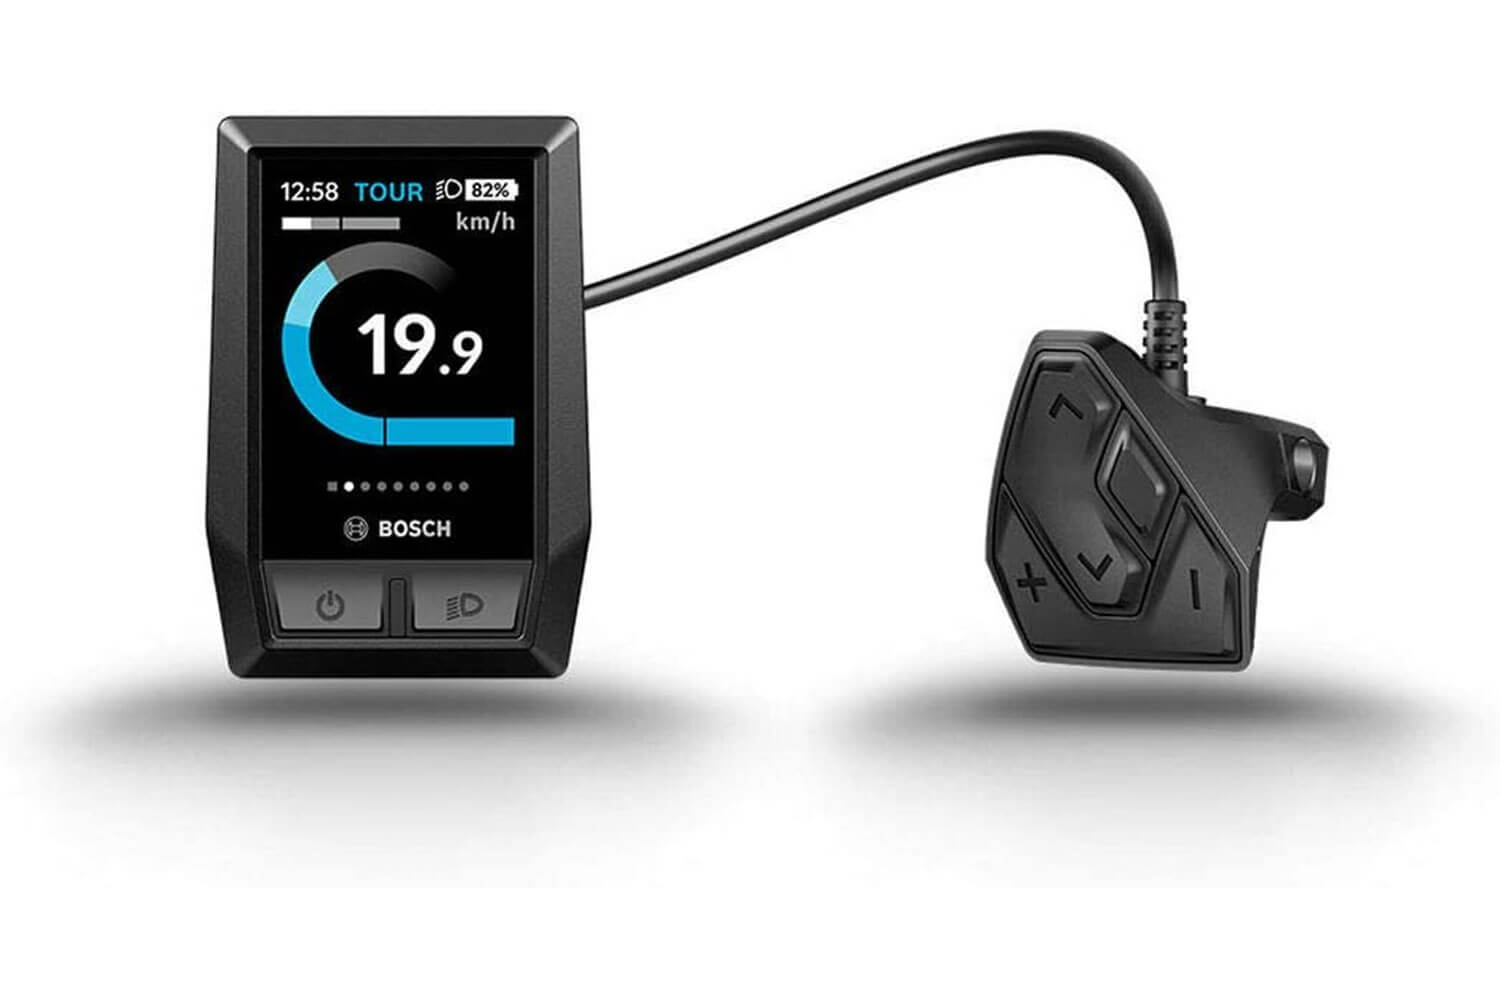 Riese und Müller Charger3 vario 625 Wh, Kiox  